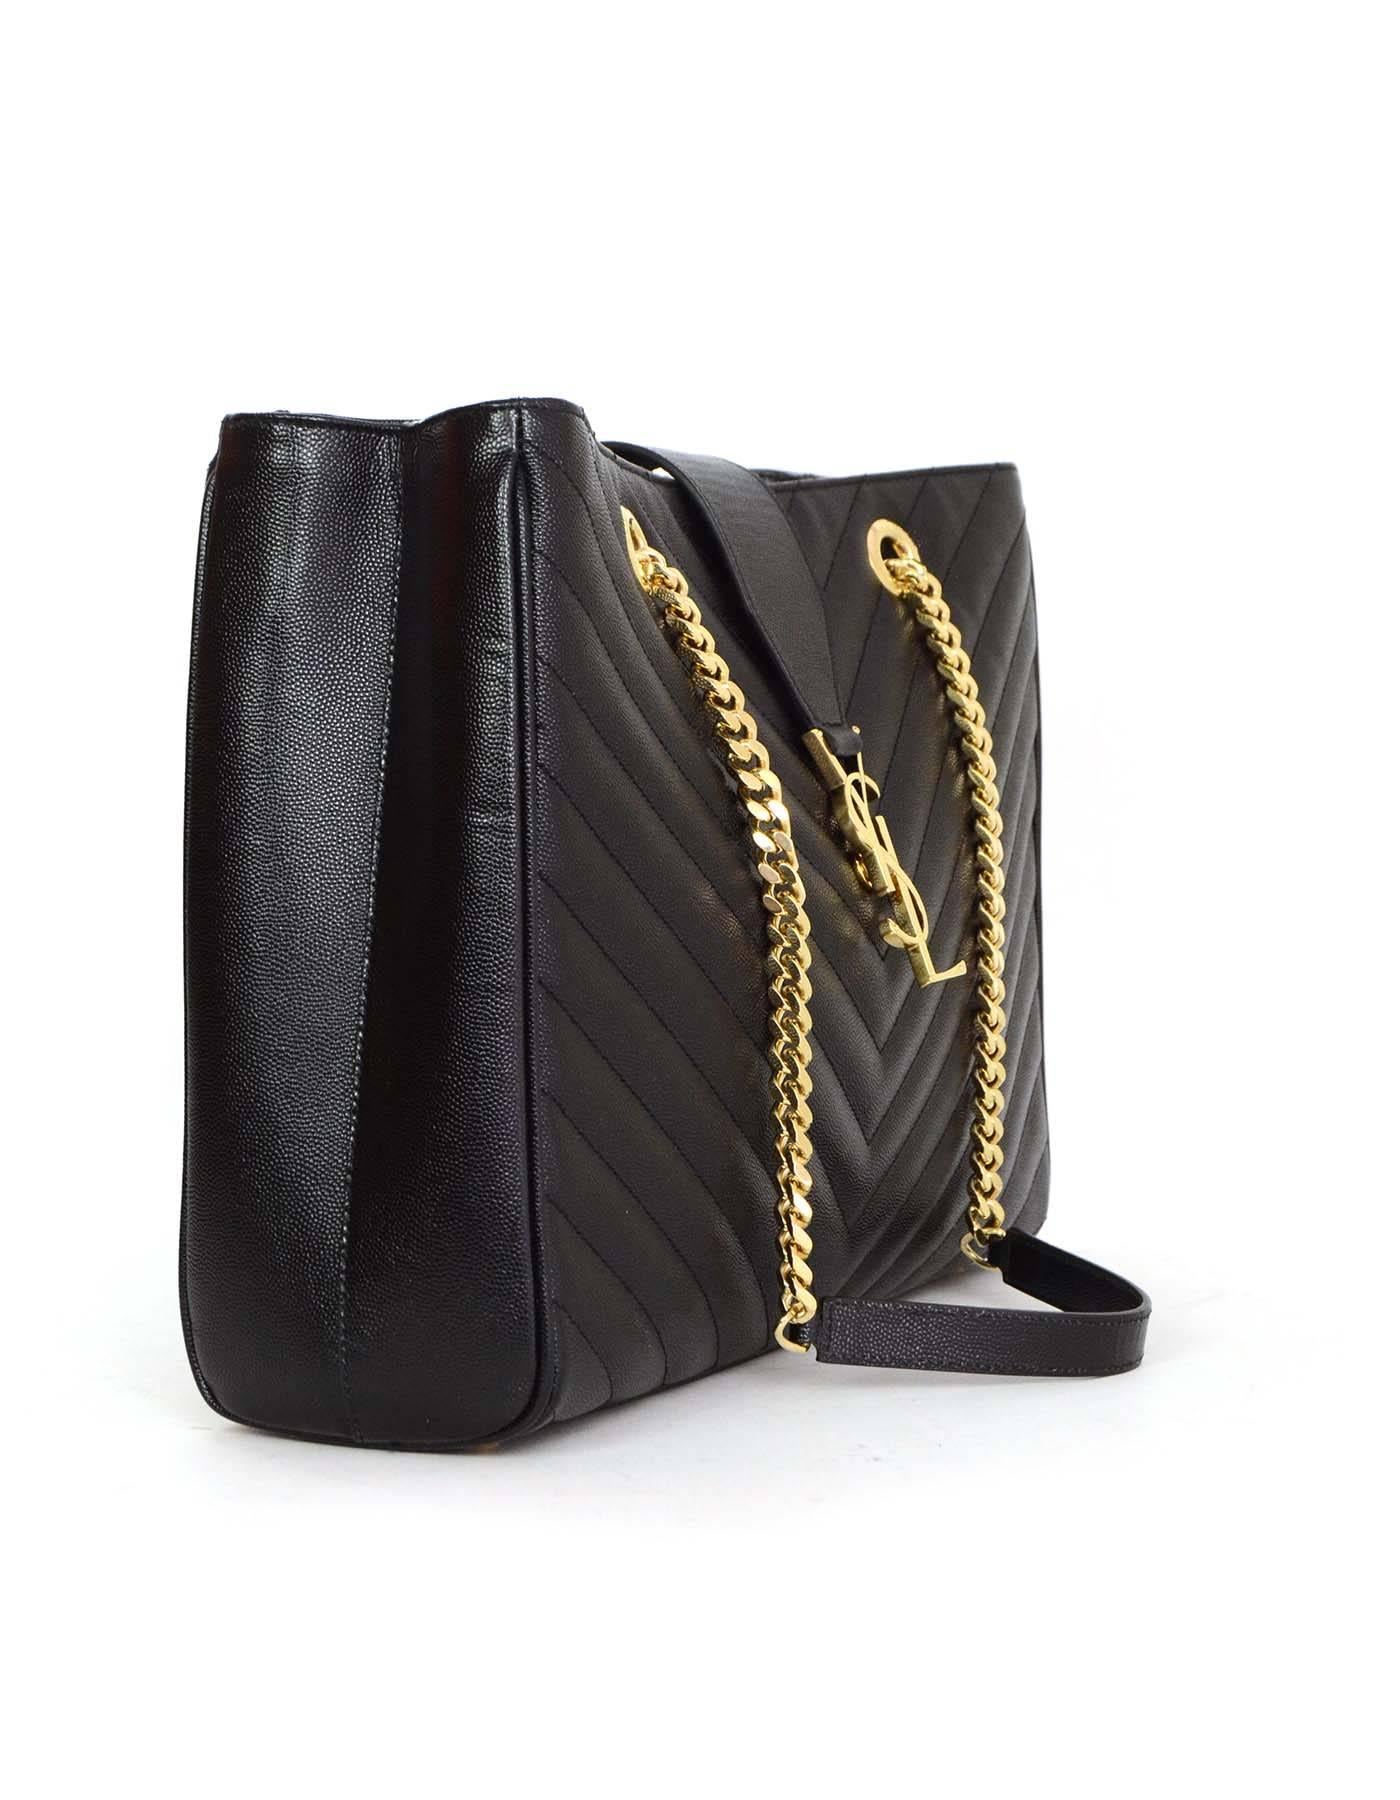 Saint Laurent Black Leather Chevron Monogram Shopper Tote Bag GHW
Features YSL logo medallion flap with magnetic snap close and a double curb-chain strap with leather shoulder rest

Made In: Italy
Color: Black
Hardware: Goldtone
Materials: